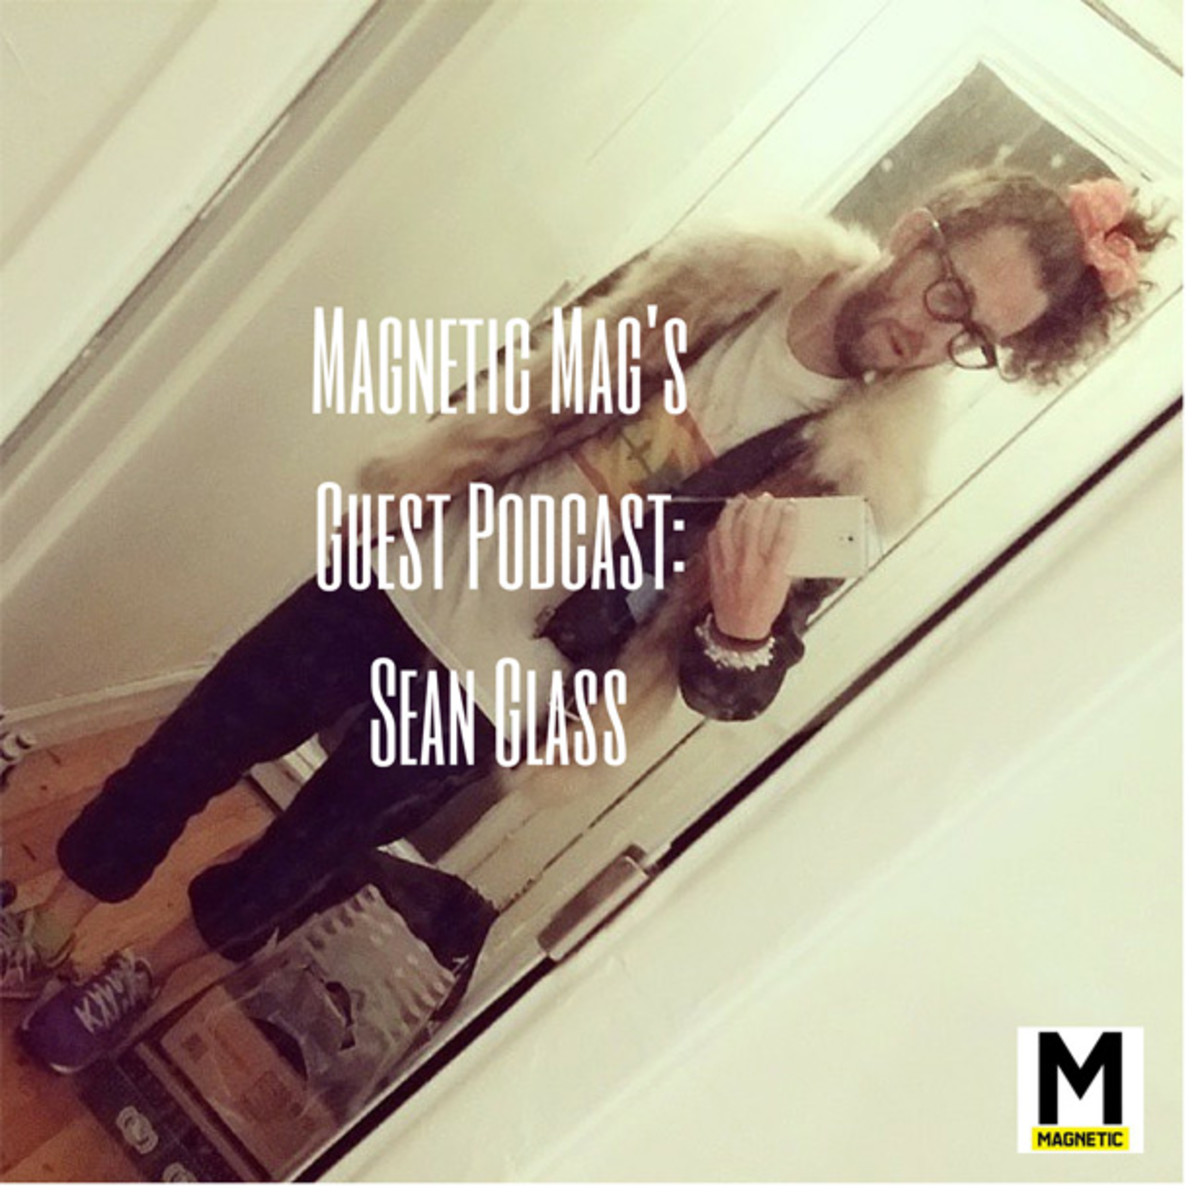 MAGNETIC Guest Podcast: Win Music's Sean Glass